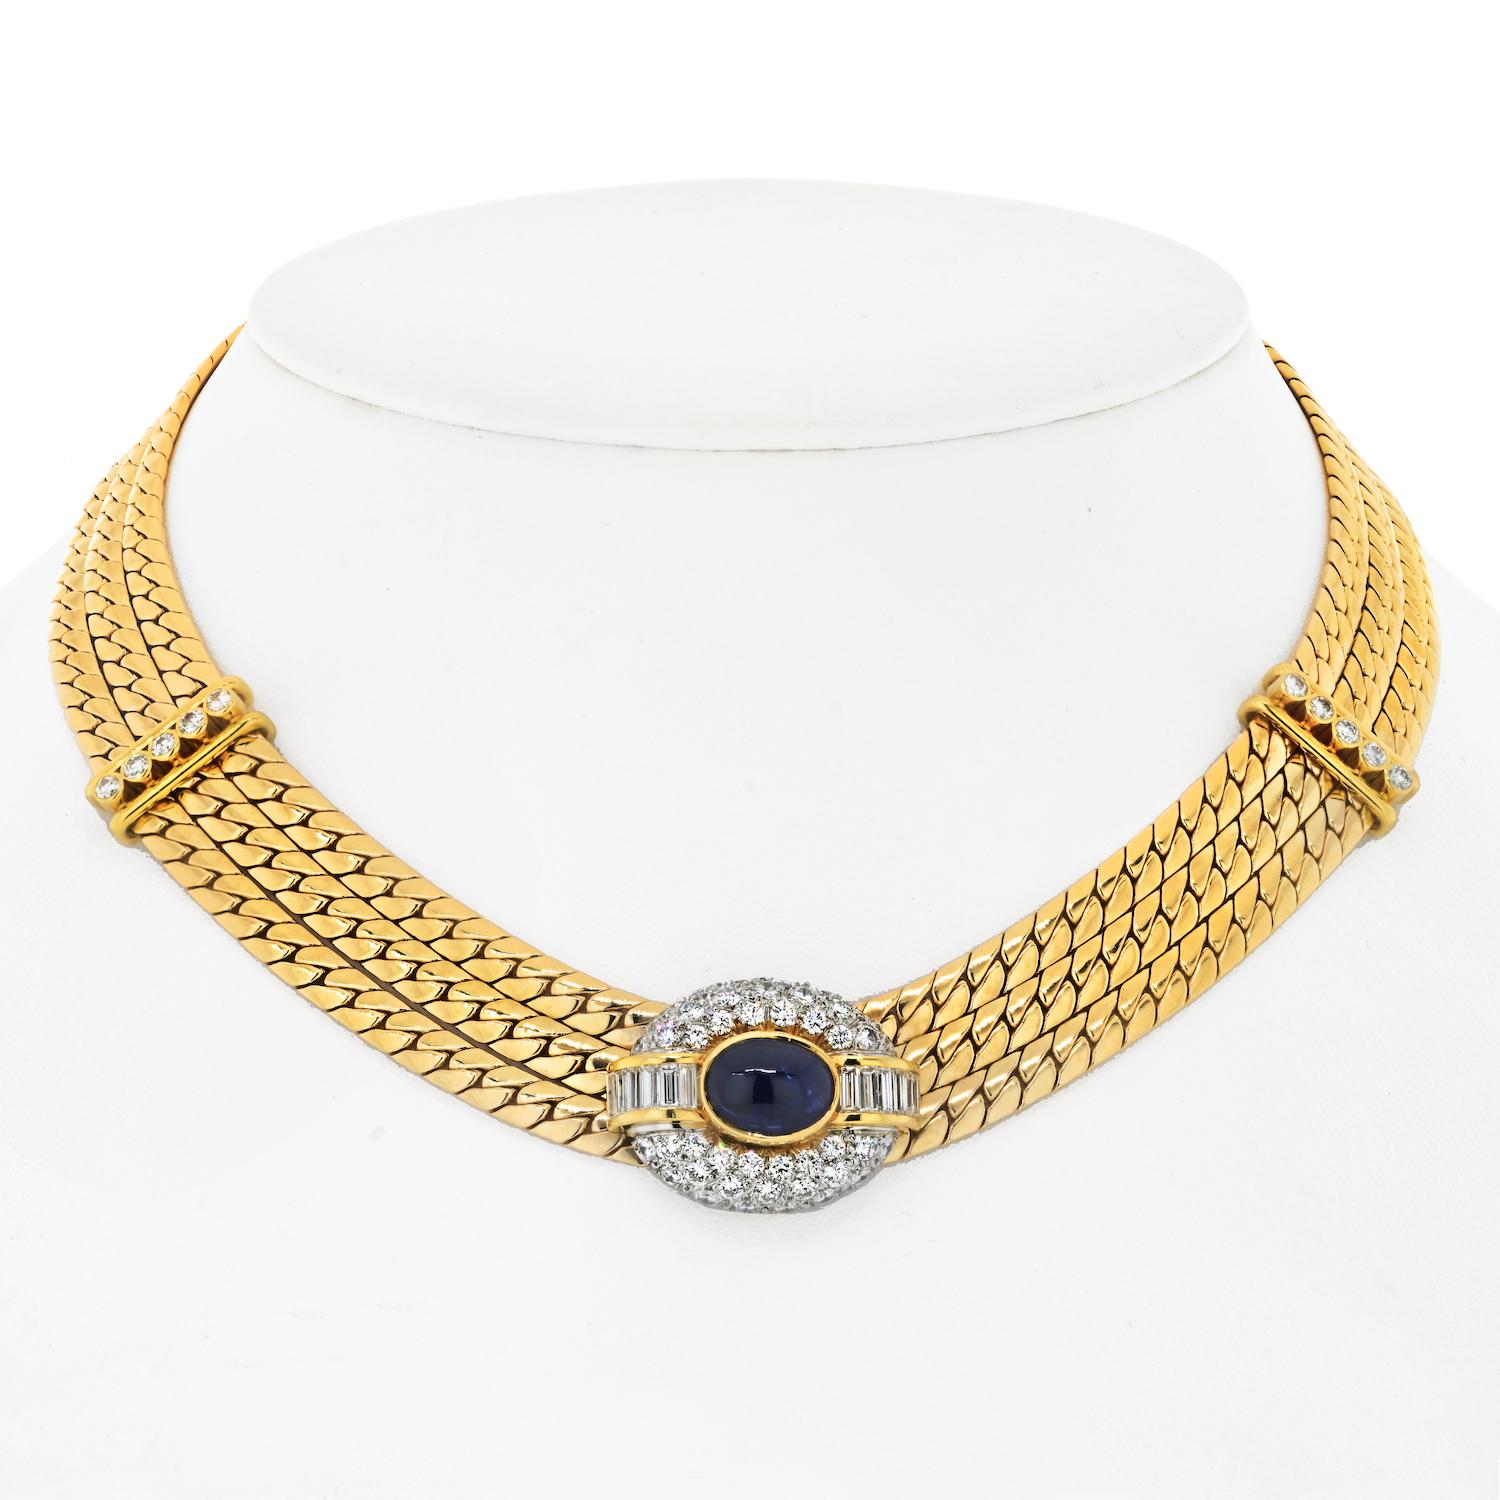 The Van Cleef & Arpels cabochon sapphire and diamond necklace is a masterpiece of luxury and sophistication. Composed of three strands of flat-links, this necklace exudes timeless elegance. At the center of the necklace, a slide pendant takes the